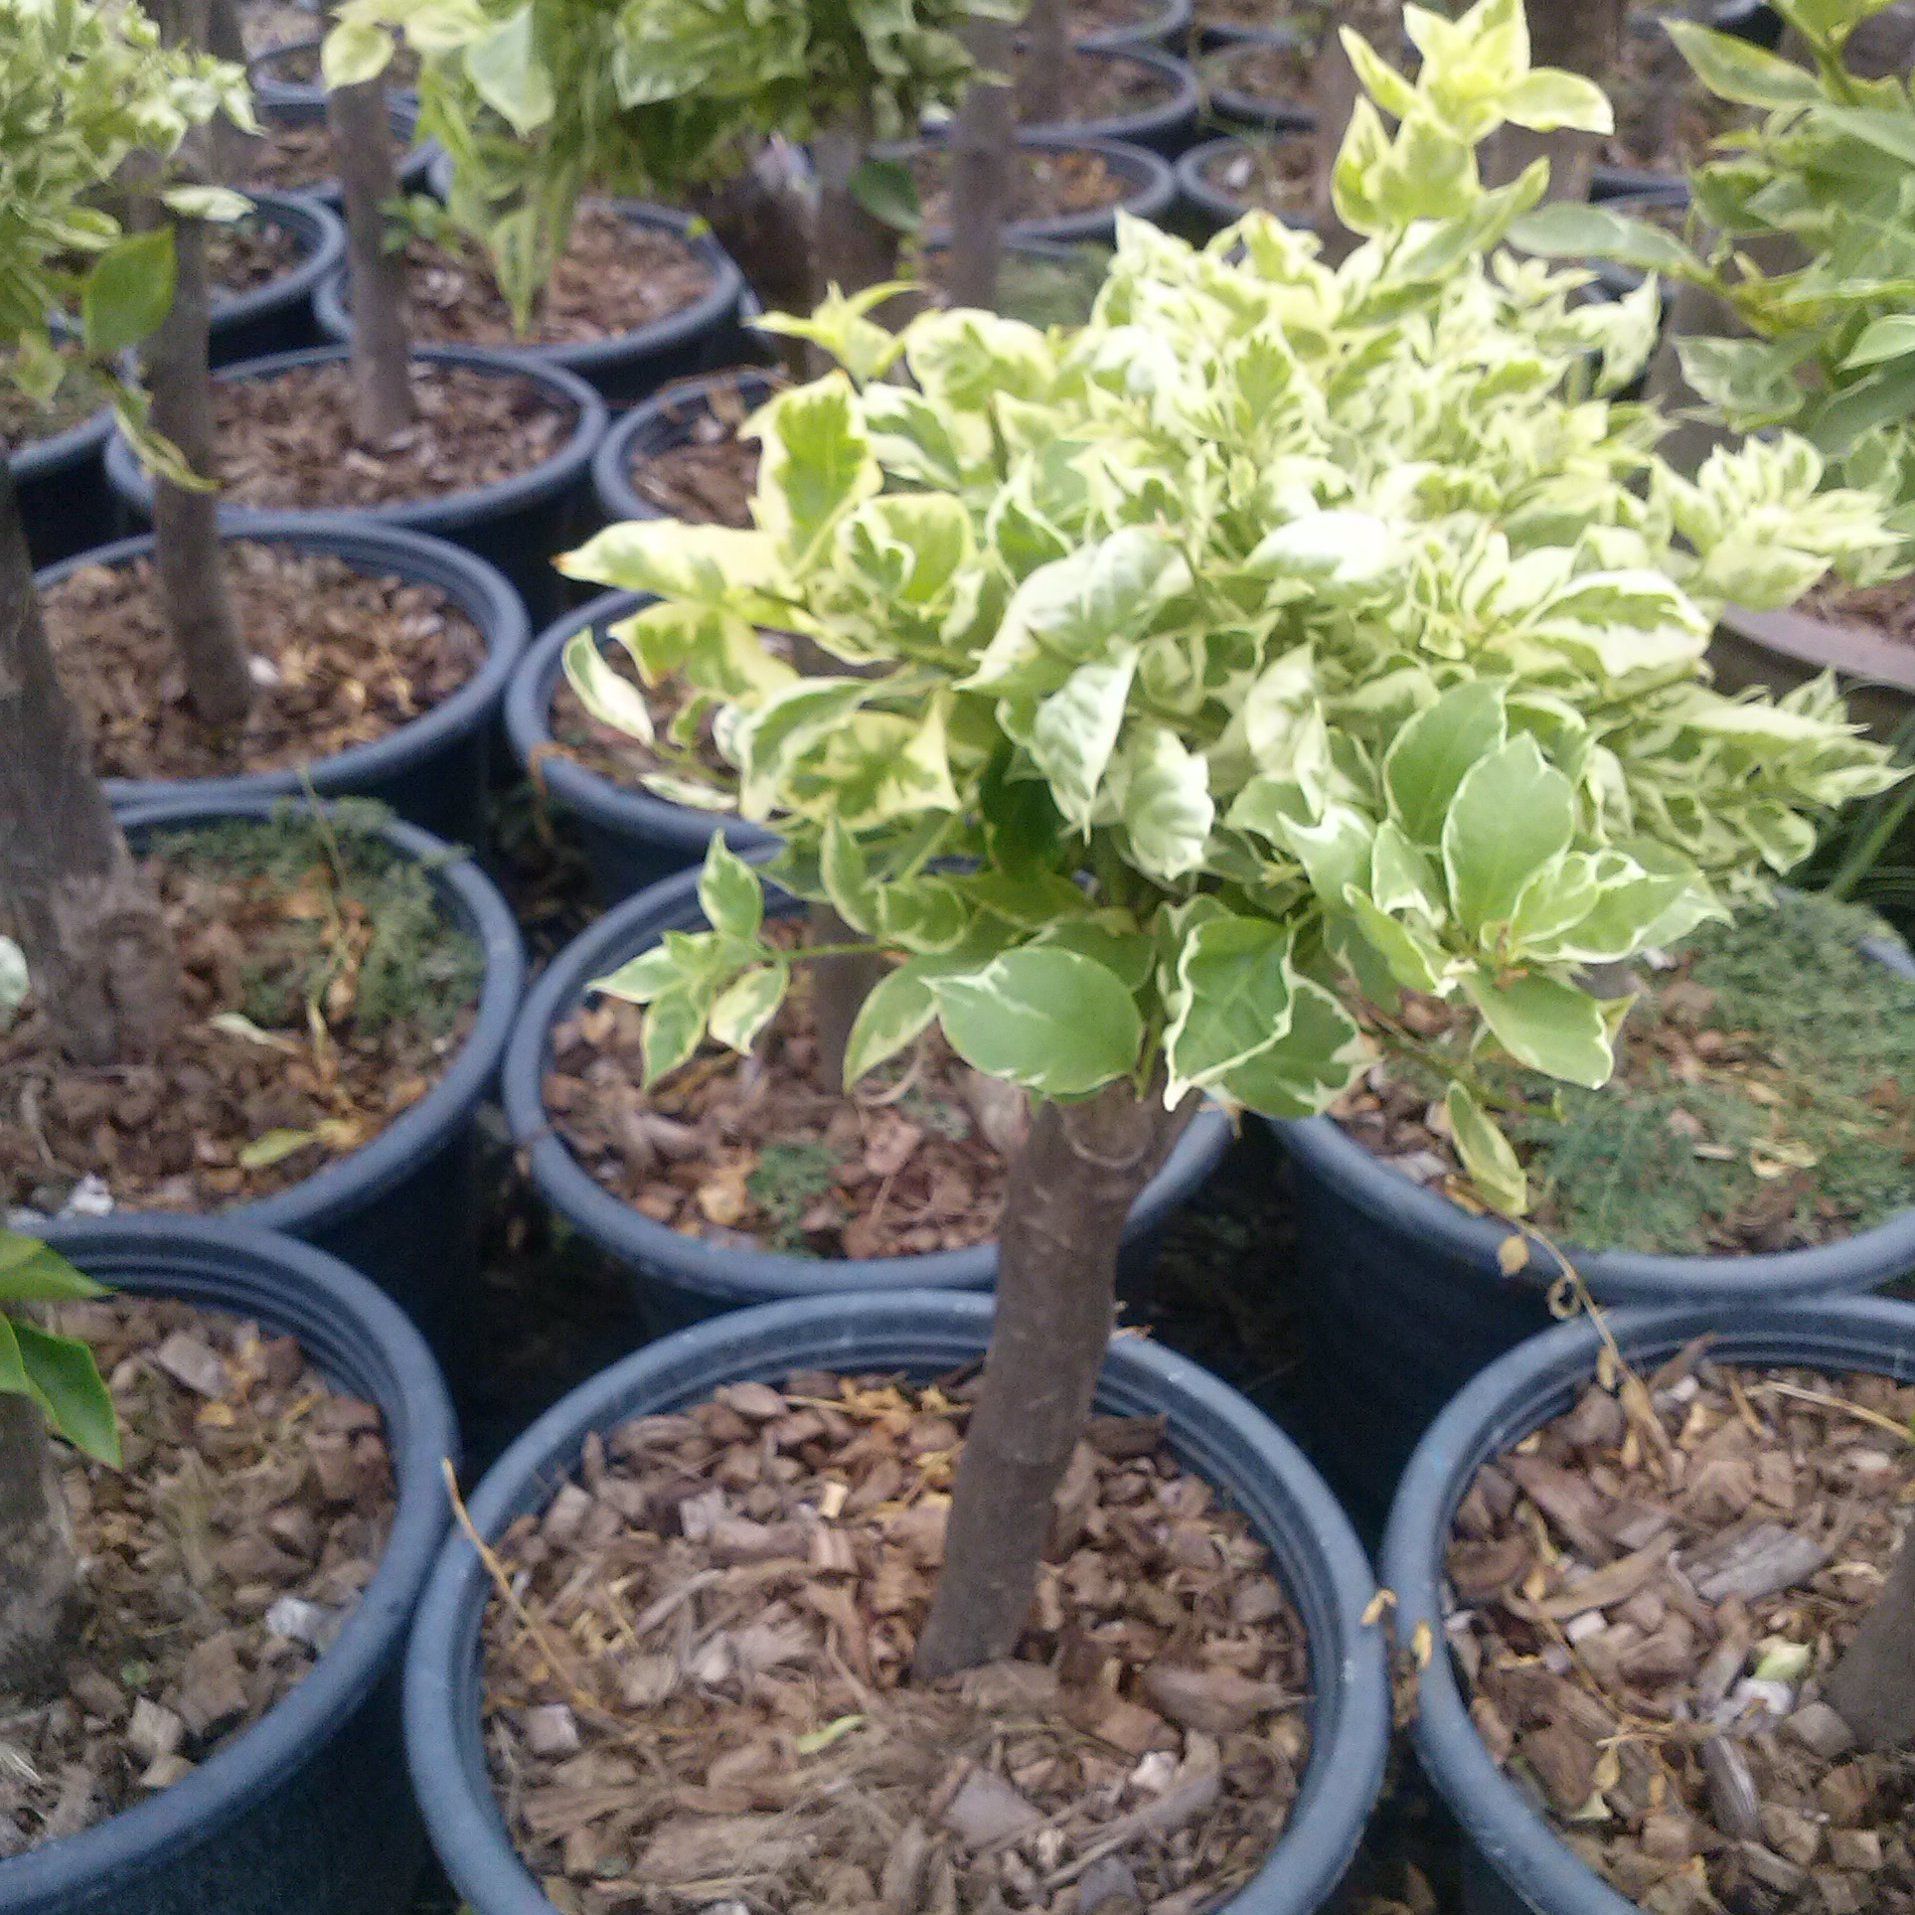 Bougainvillea graft variegated exporting quality to middle east country price are very cheap per plants